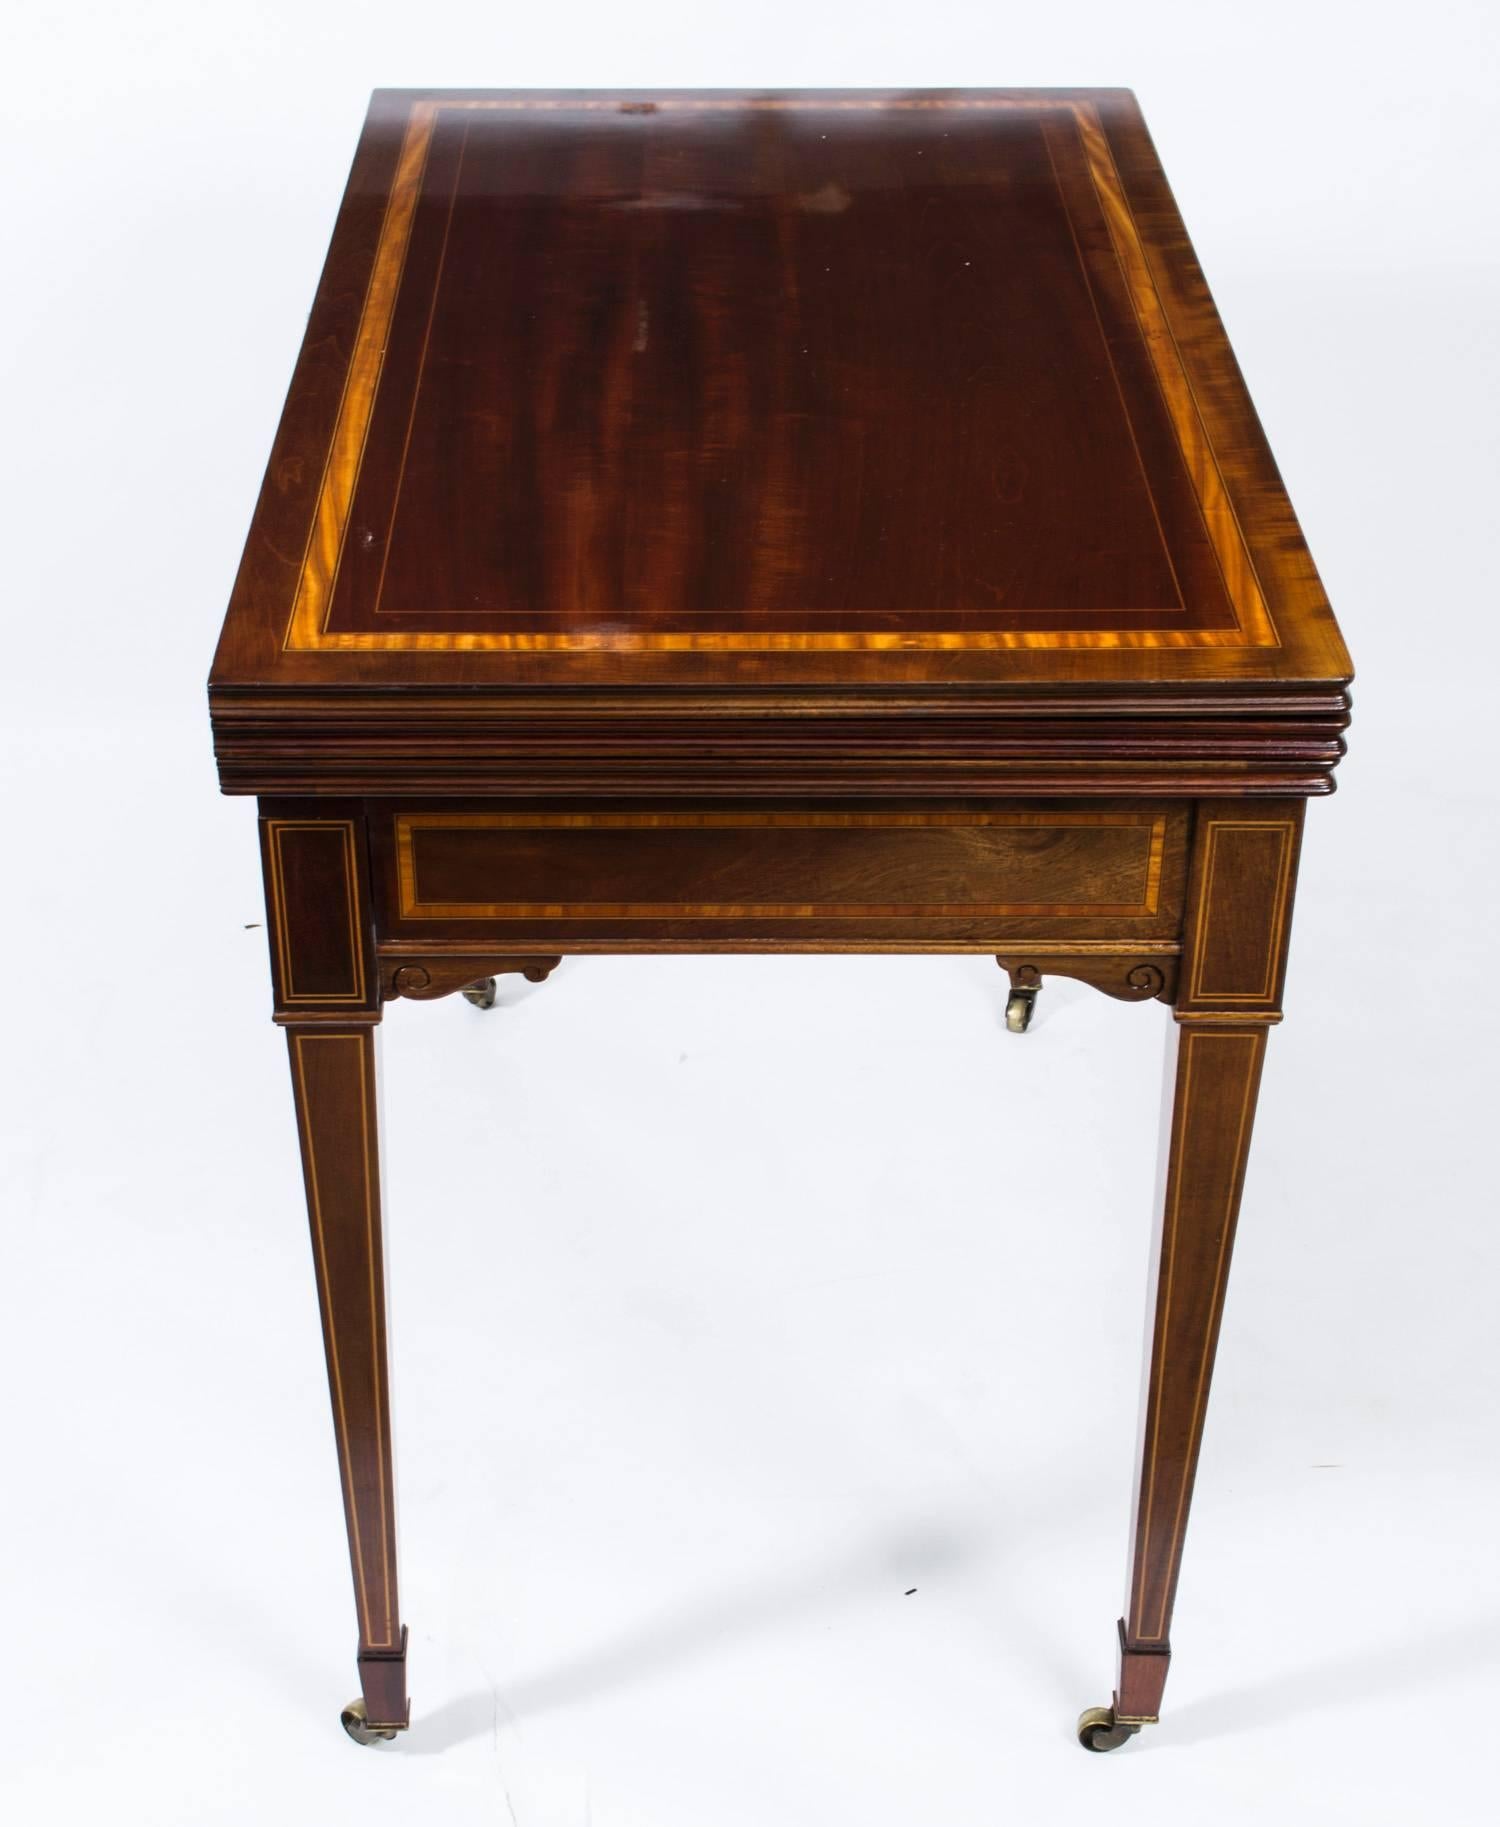 Early 20th Century Antique Edwardian Mahogany Games Roulette Table, circa 1900